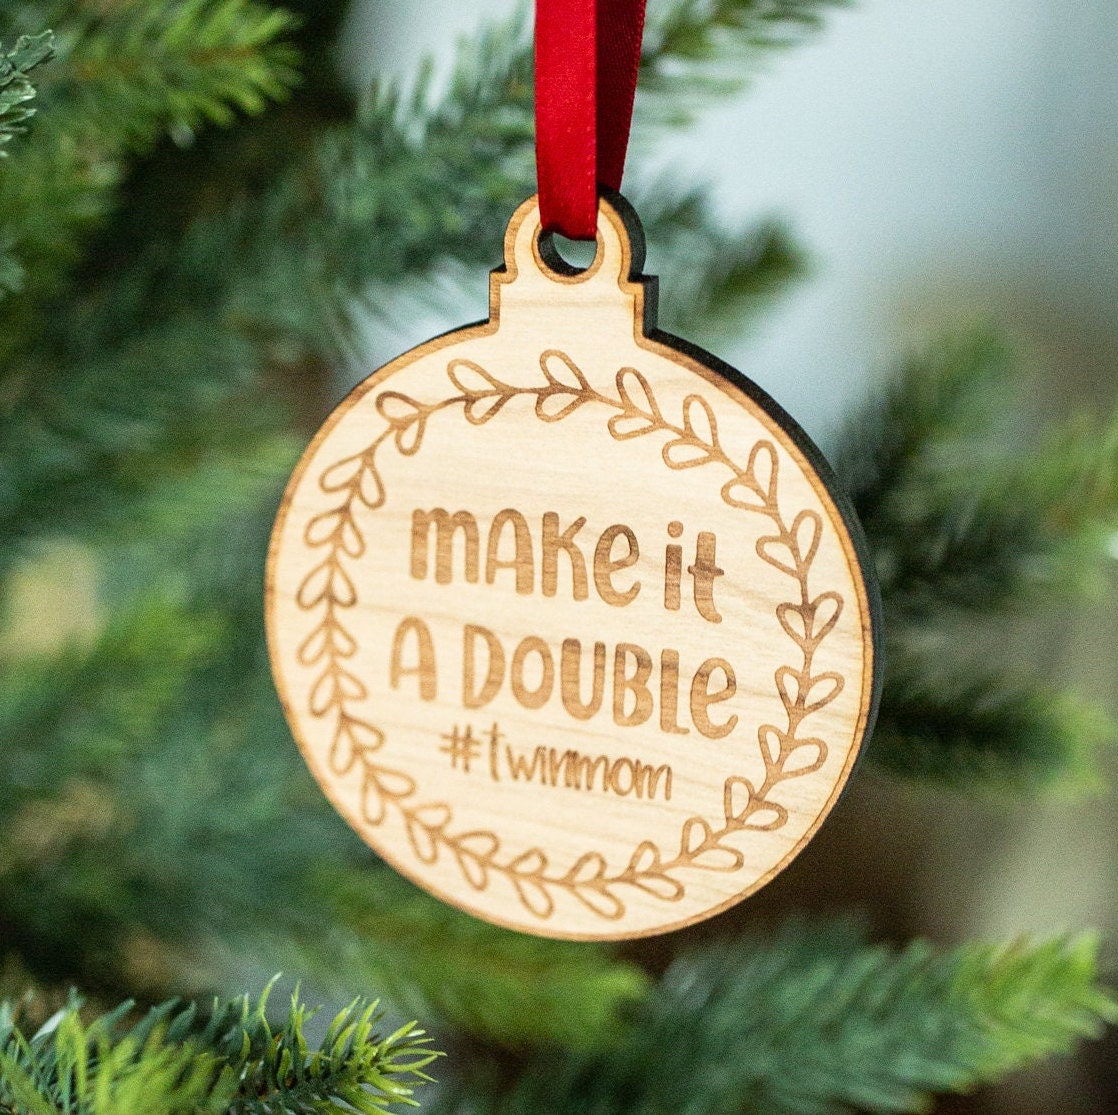 Make It A Double #Twinmom- Engraved Wooden Funny Christmas Ornament Charm,  Funny Christmas Gift For Mom, Funny Holiday Gift Ornament For Mom – 3C  Etching LTD